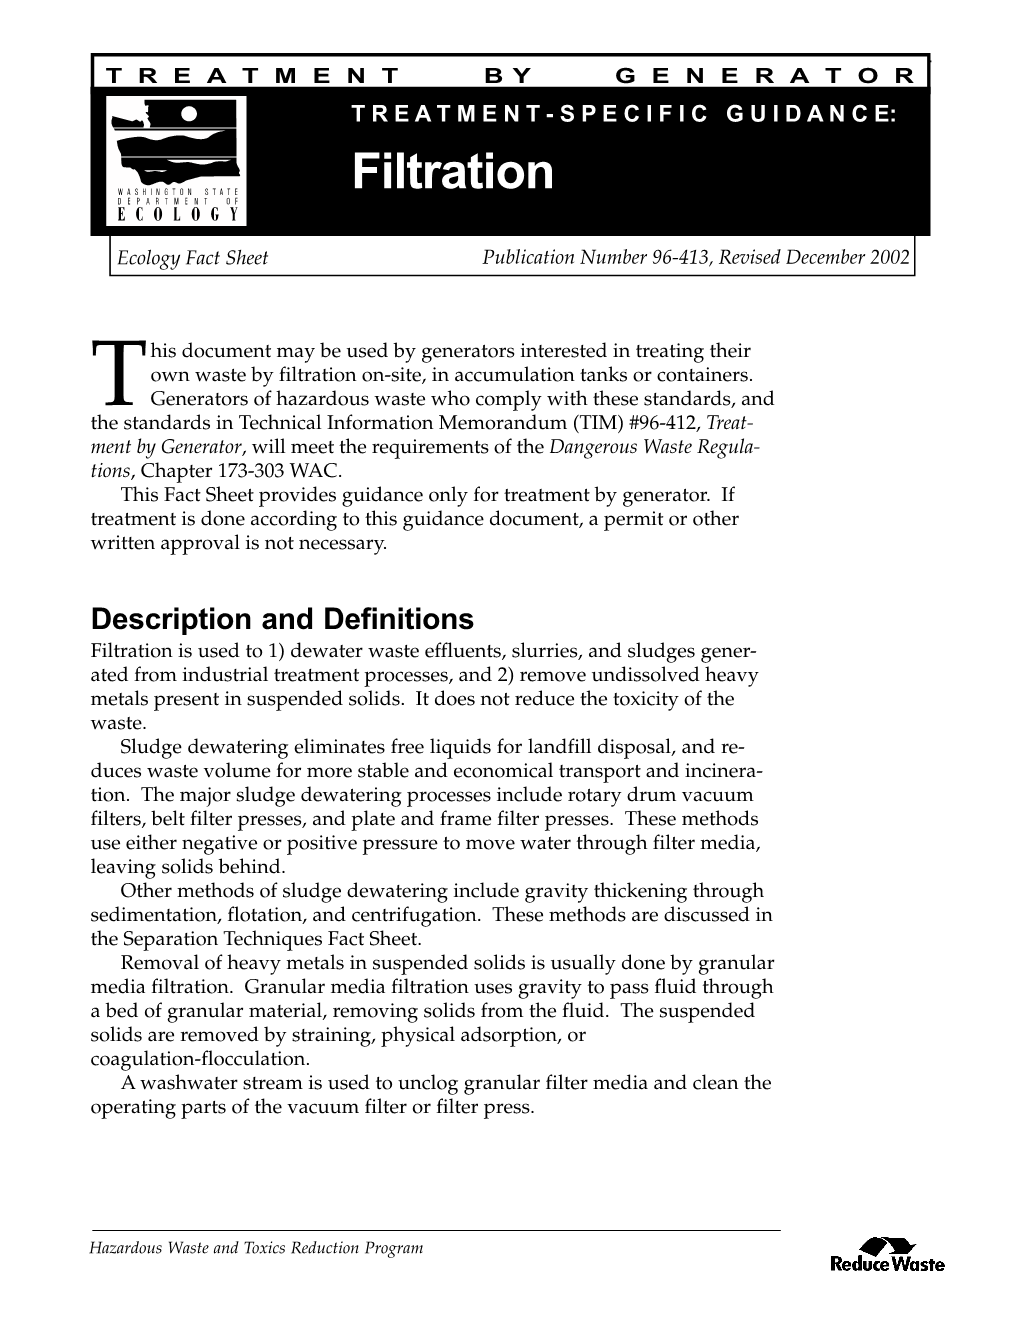 Filtration: Treatment Specific Guidance